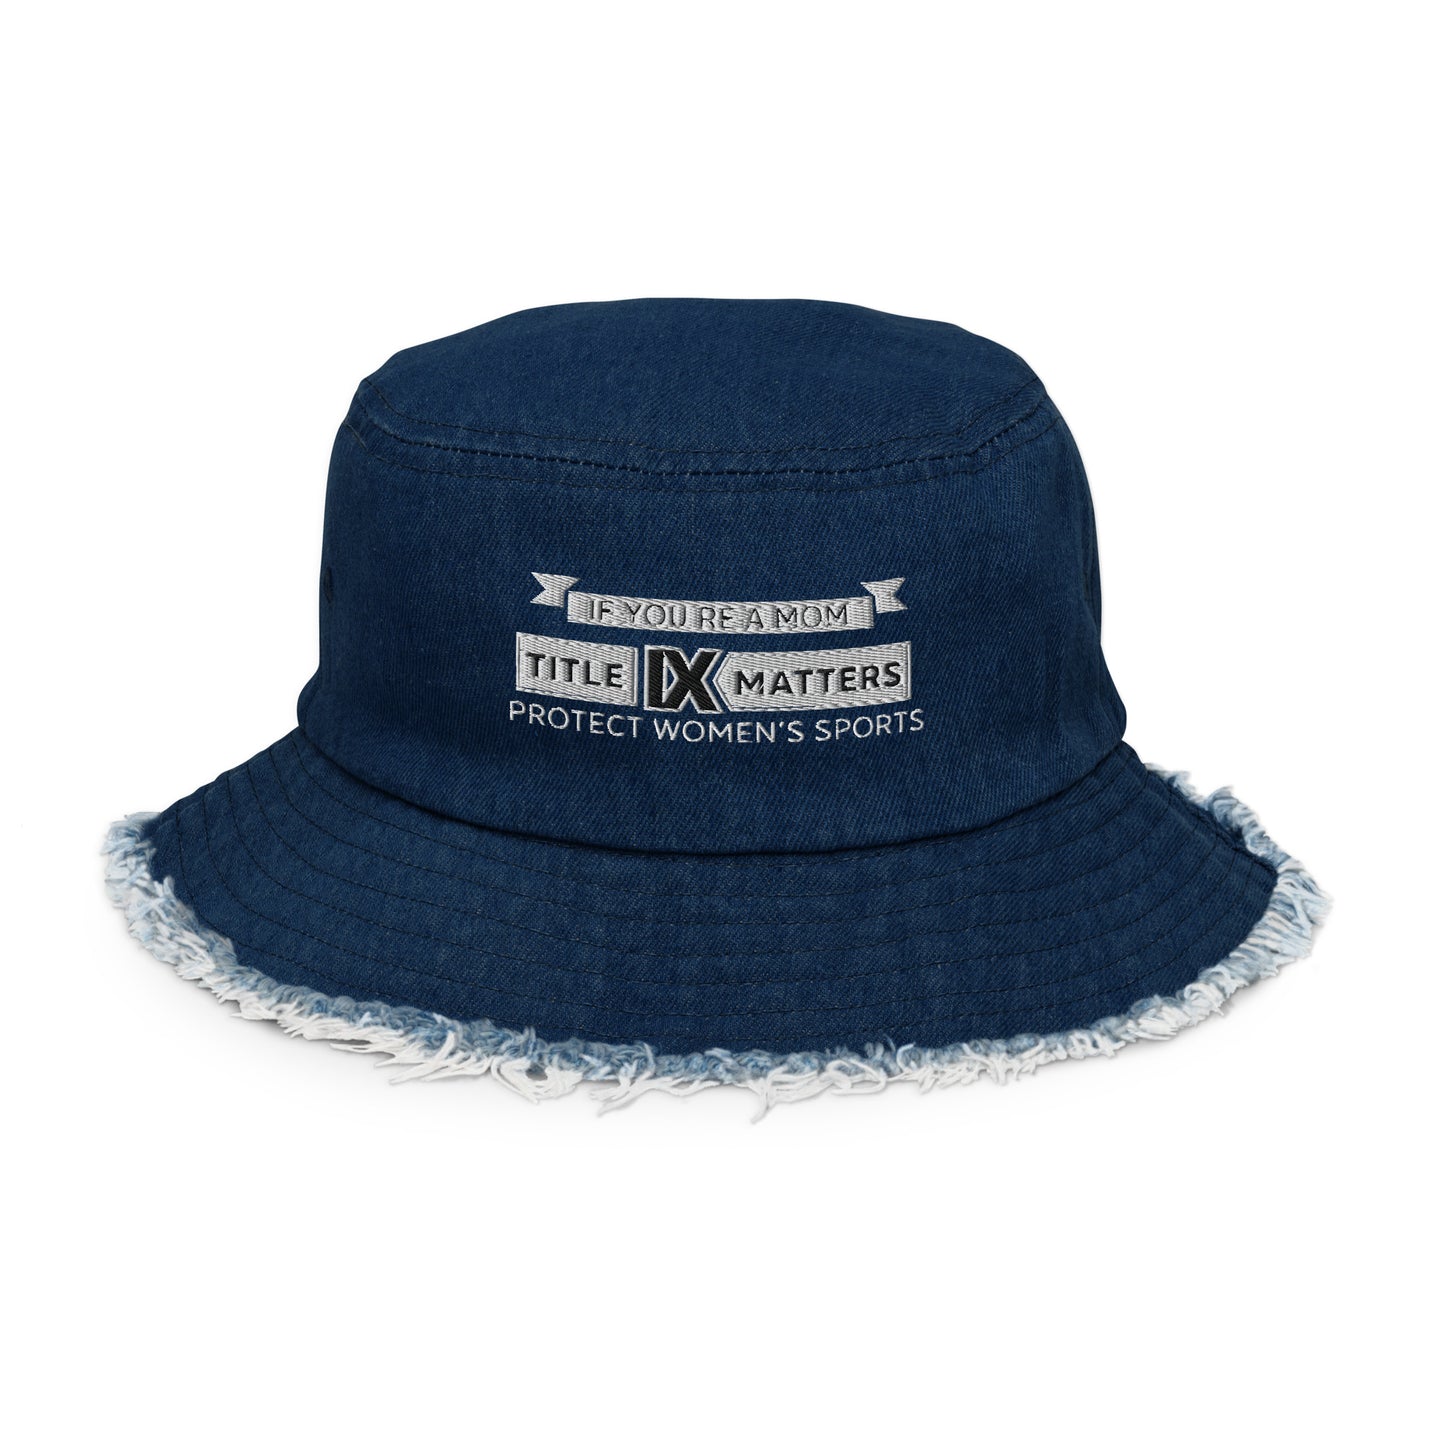 If You're a Mom Distressed denim bucket hat Embroidered